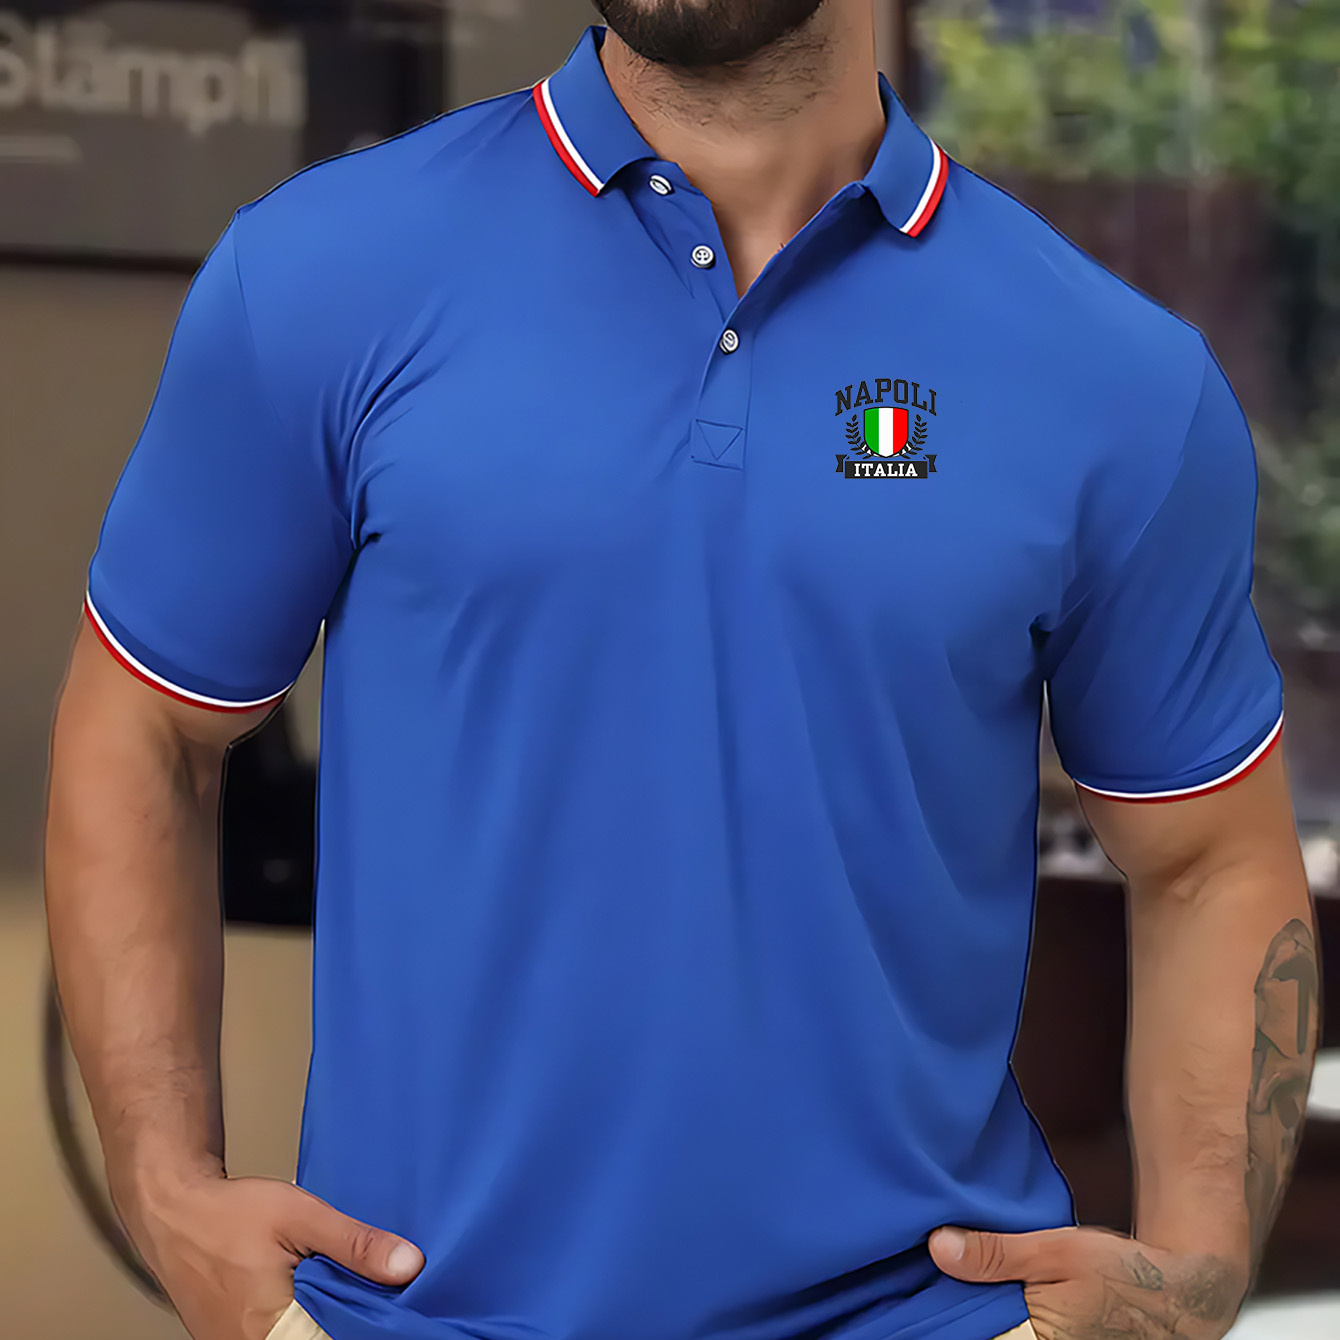 

Italy Napoli Print Summer Men's Breathable Golf Short Sleeve Shirts Sports Top For Athletic Gym, For Bodybuilding Workout Running Training Men's Clothing